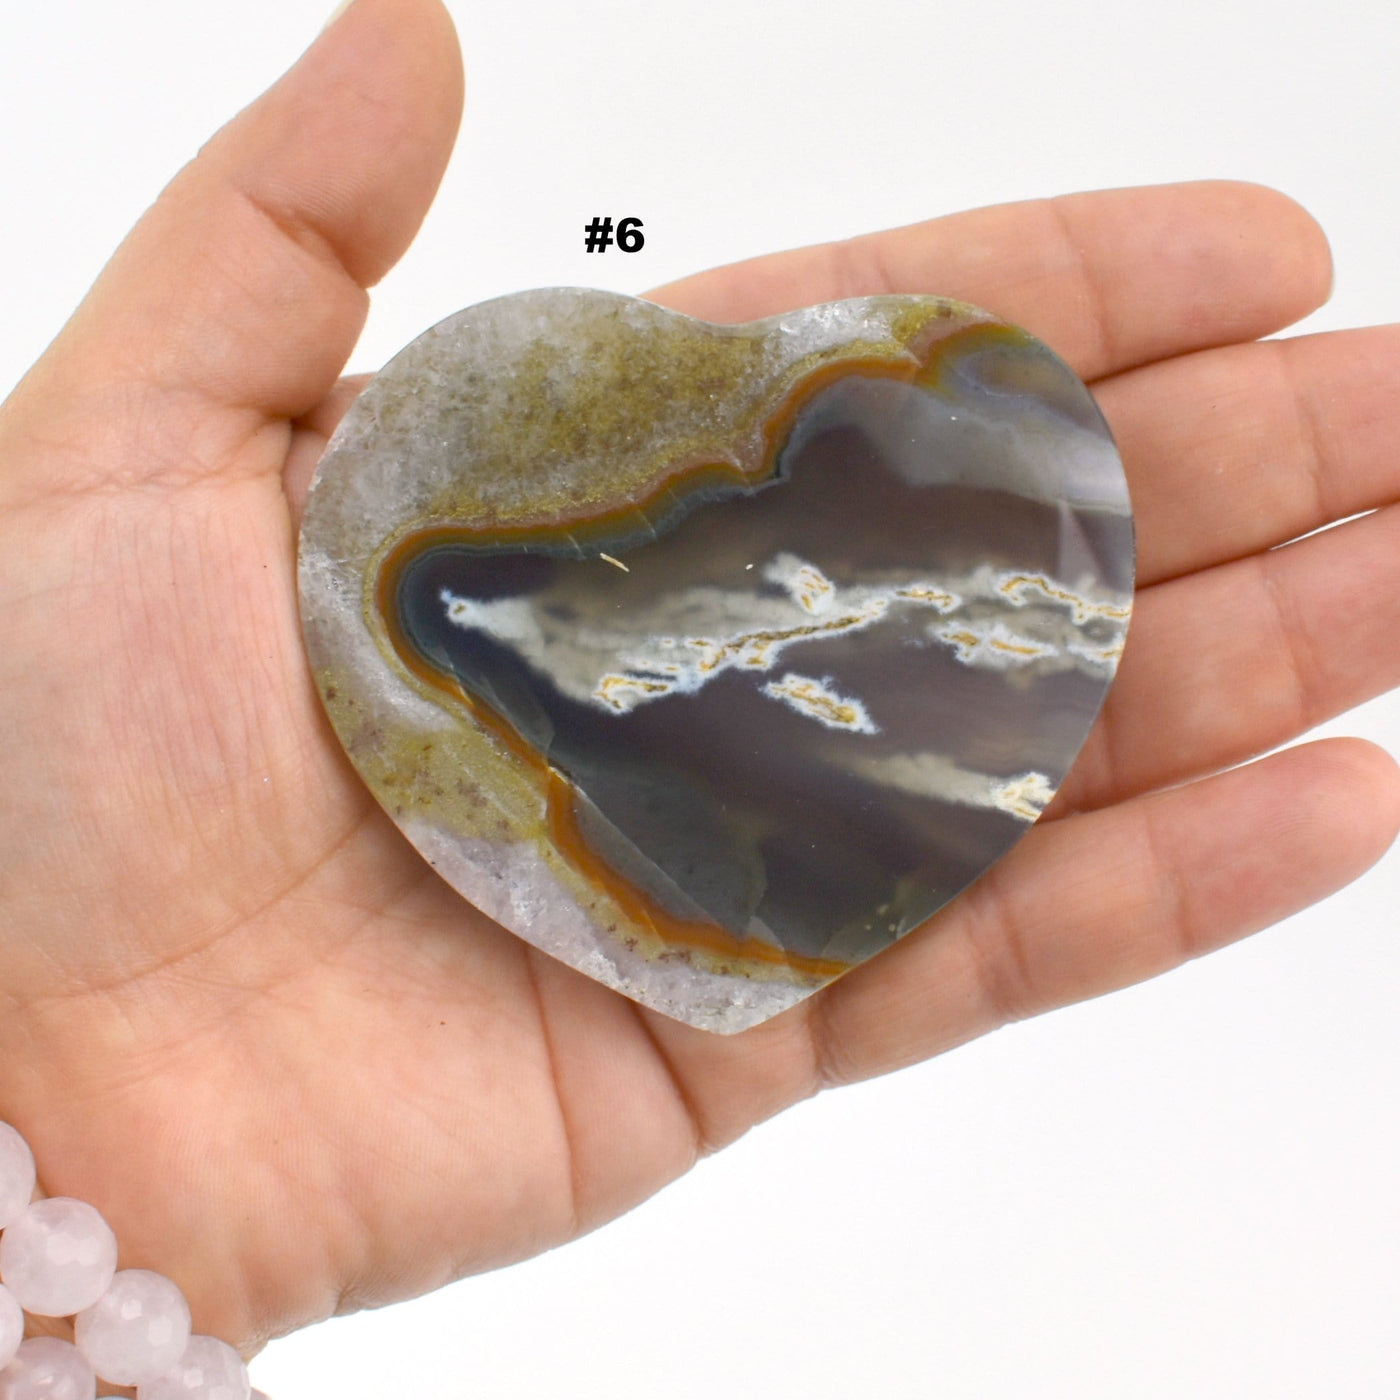 Agate heart slice #6 in a hand with a white background.